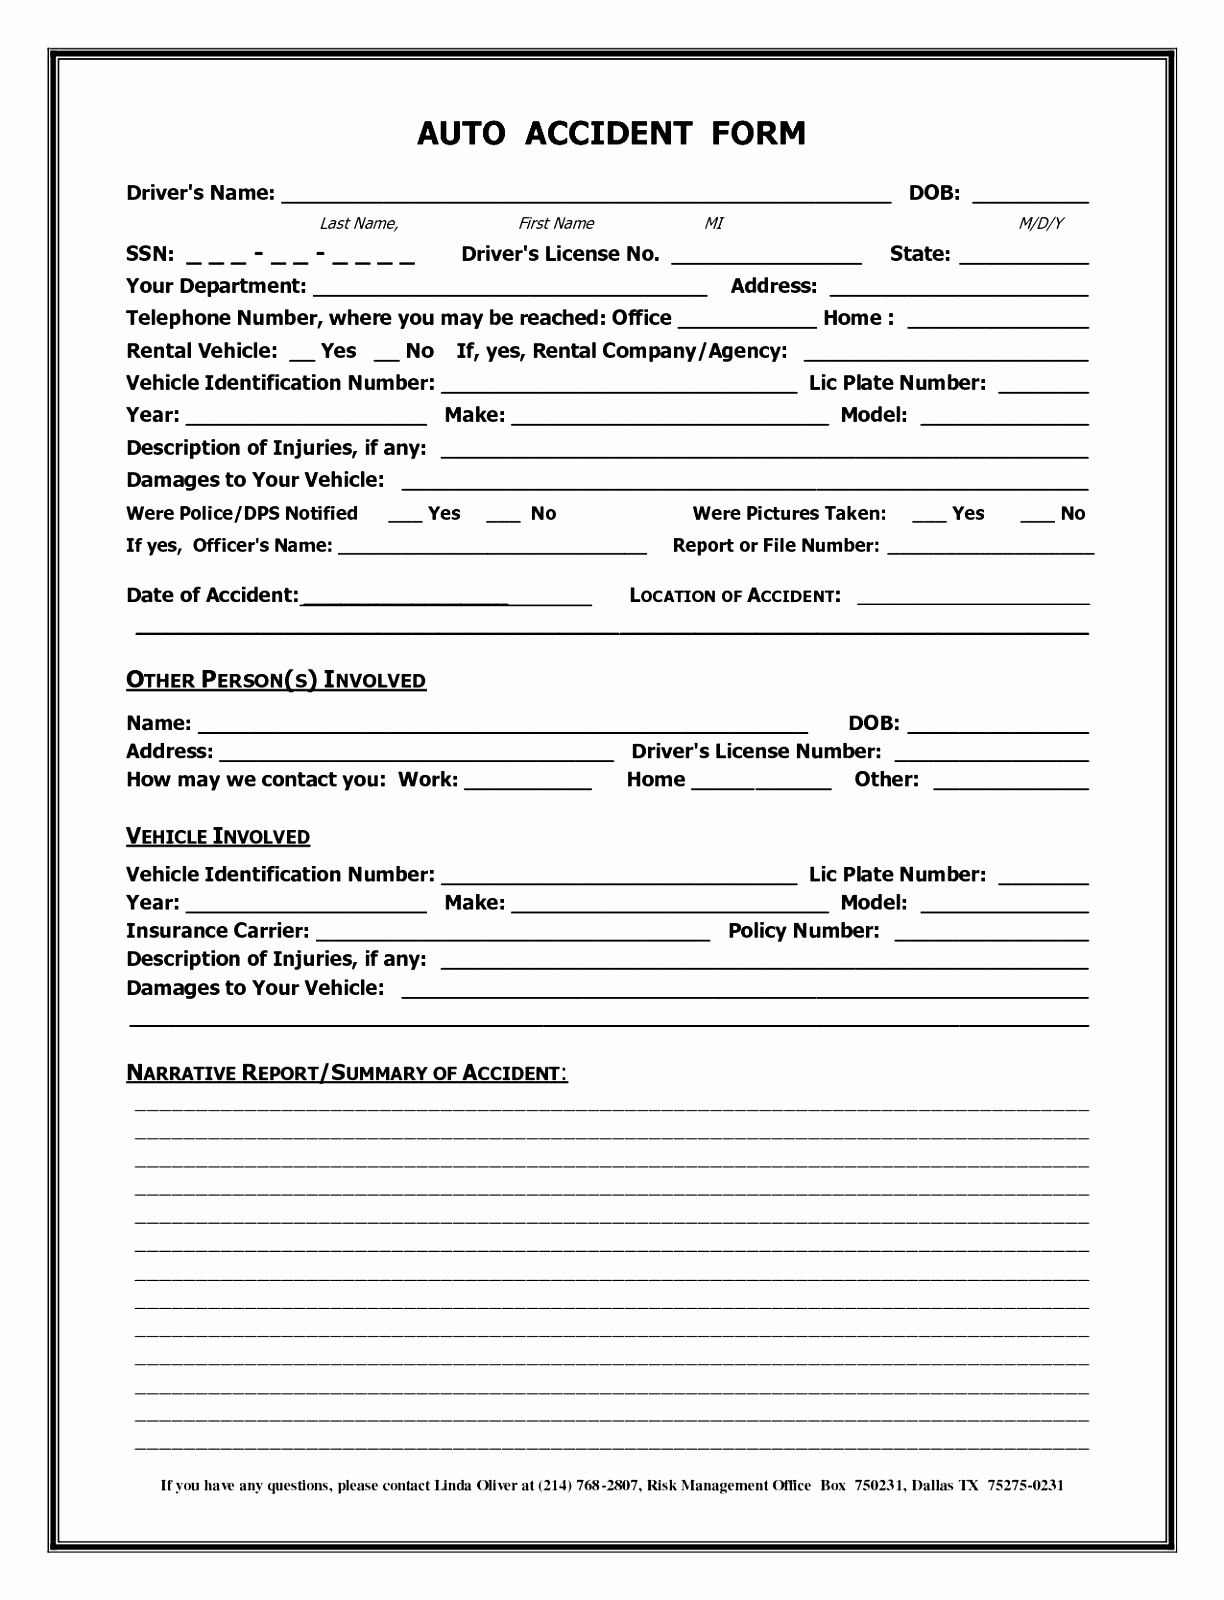 Accident Report Form Template Uk Of Motor Vehicle Choice Image throughout Motor Vehicle Accident Report Form Template